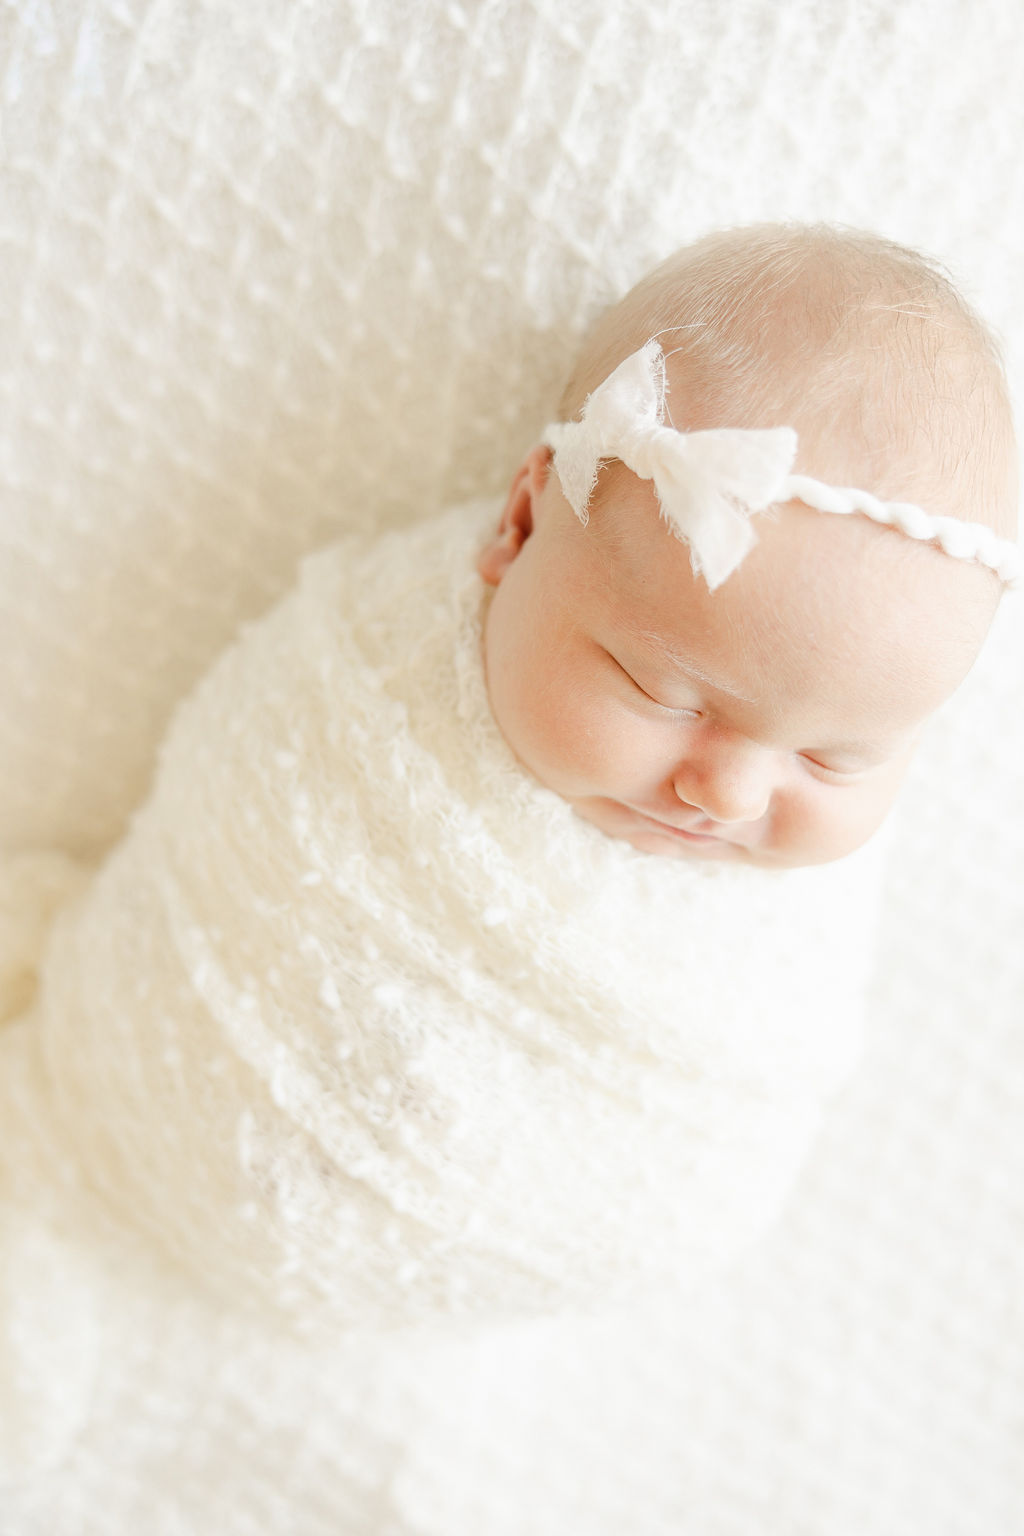 A newborn baby sleeps in a white swaddle with a white bow on her head indy night nanny